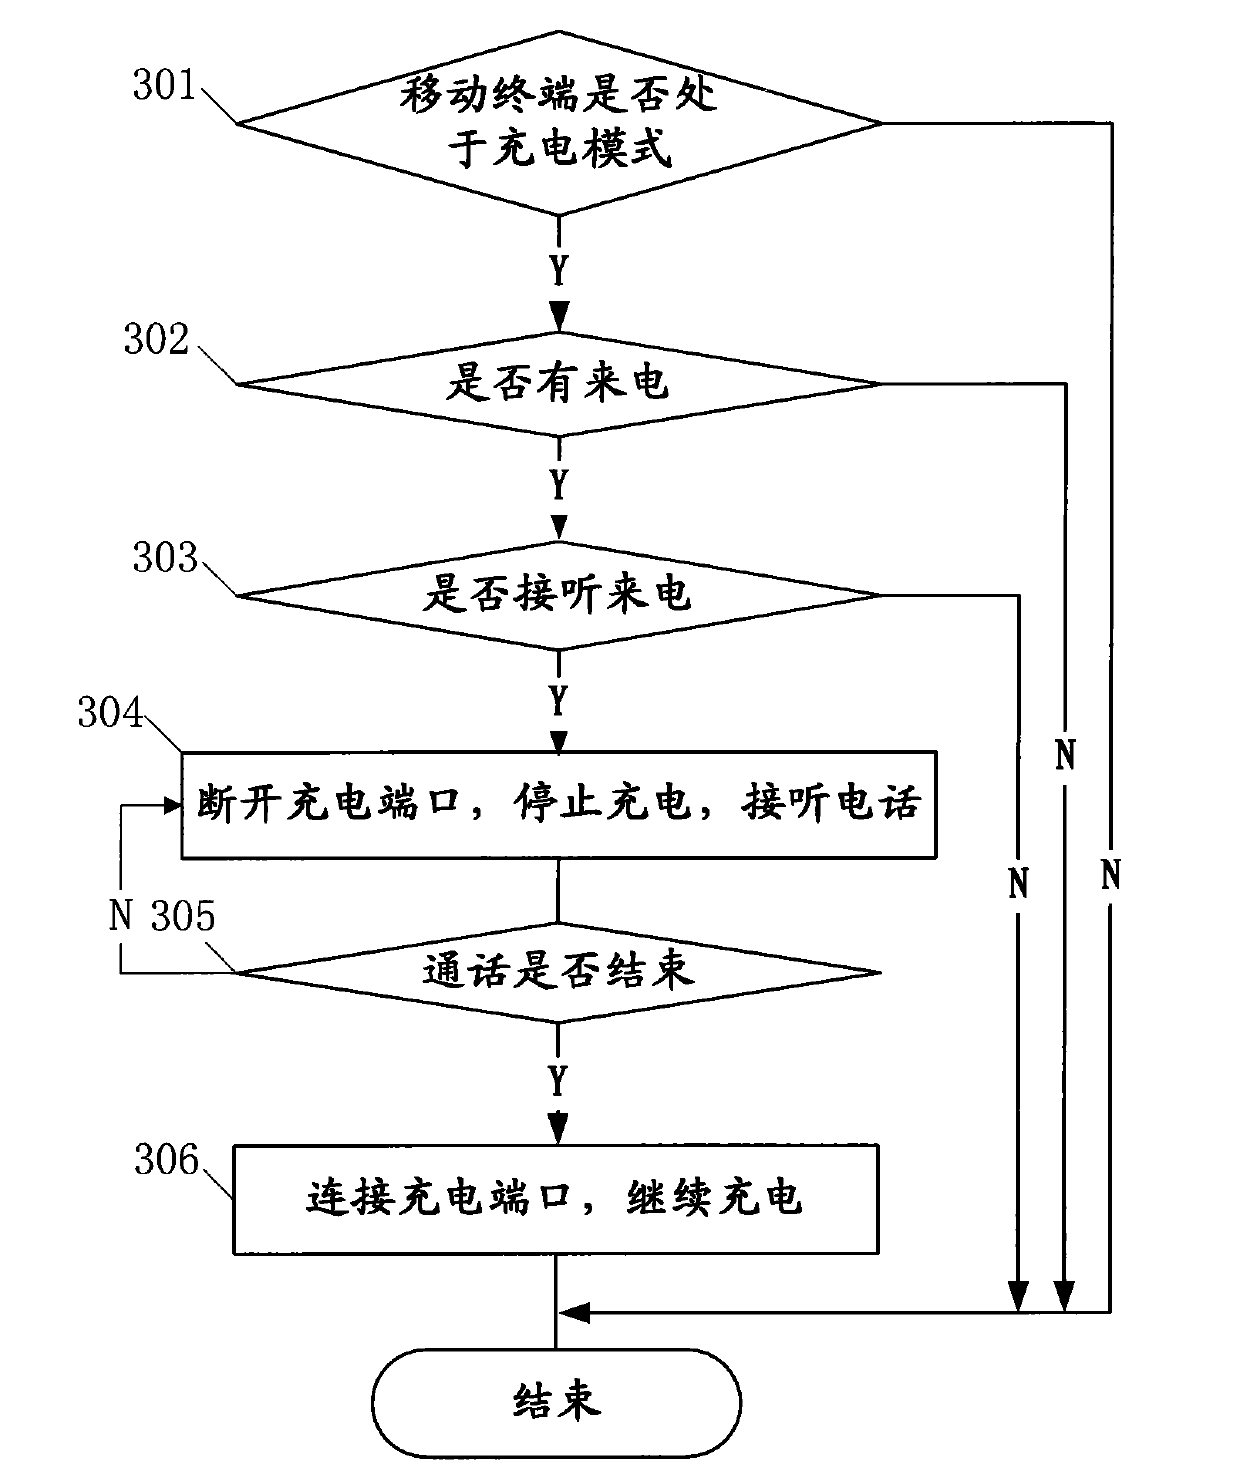 Mobile terminal charging control method, device and mobile terminal